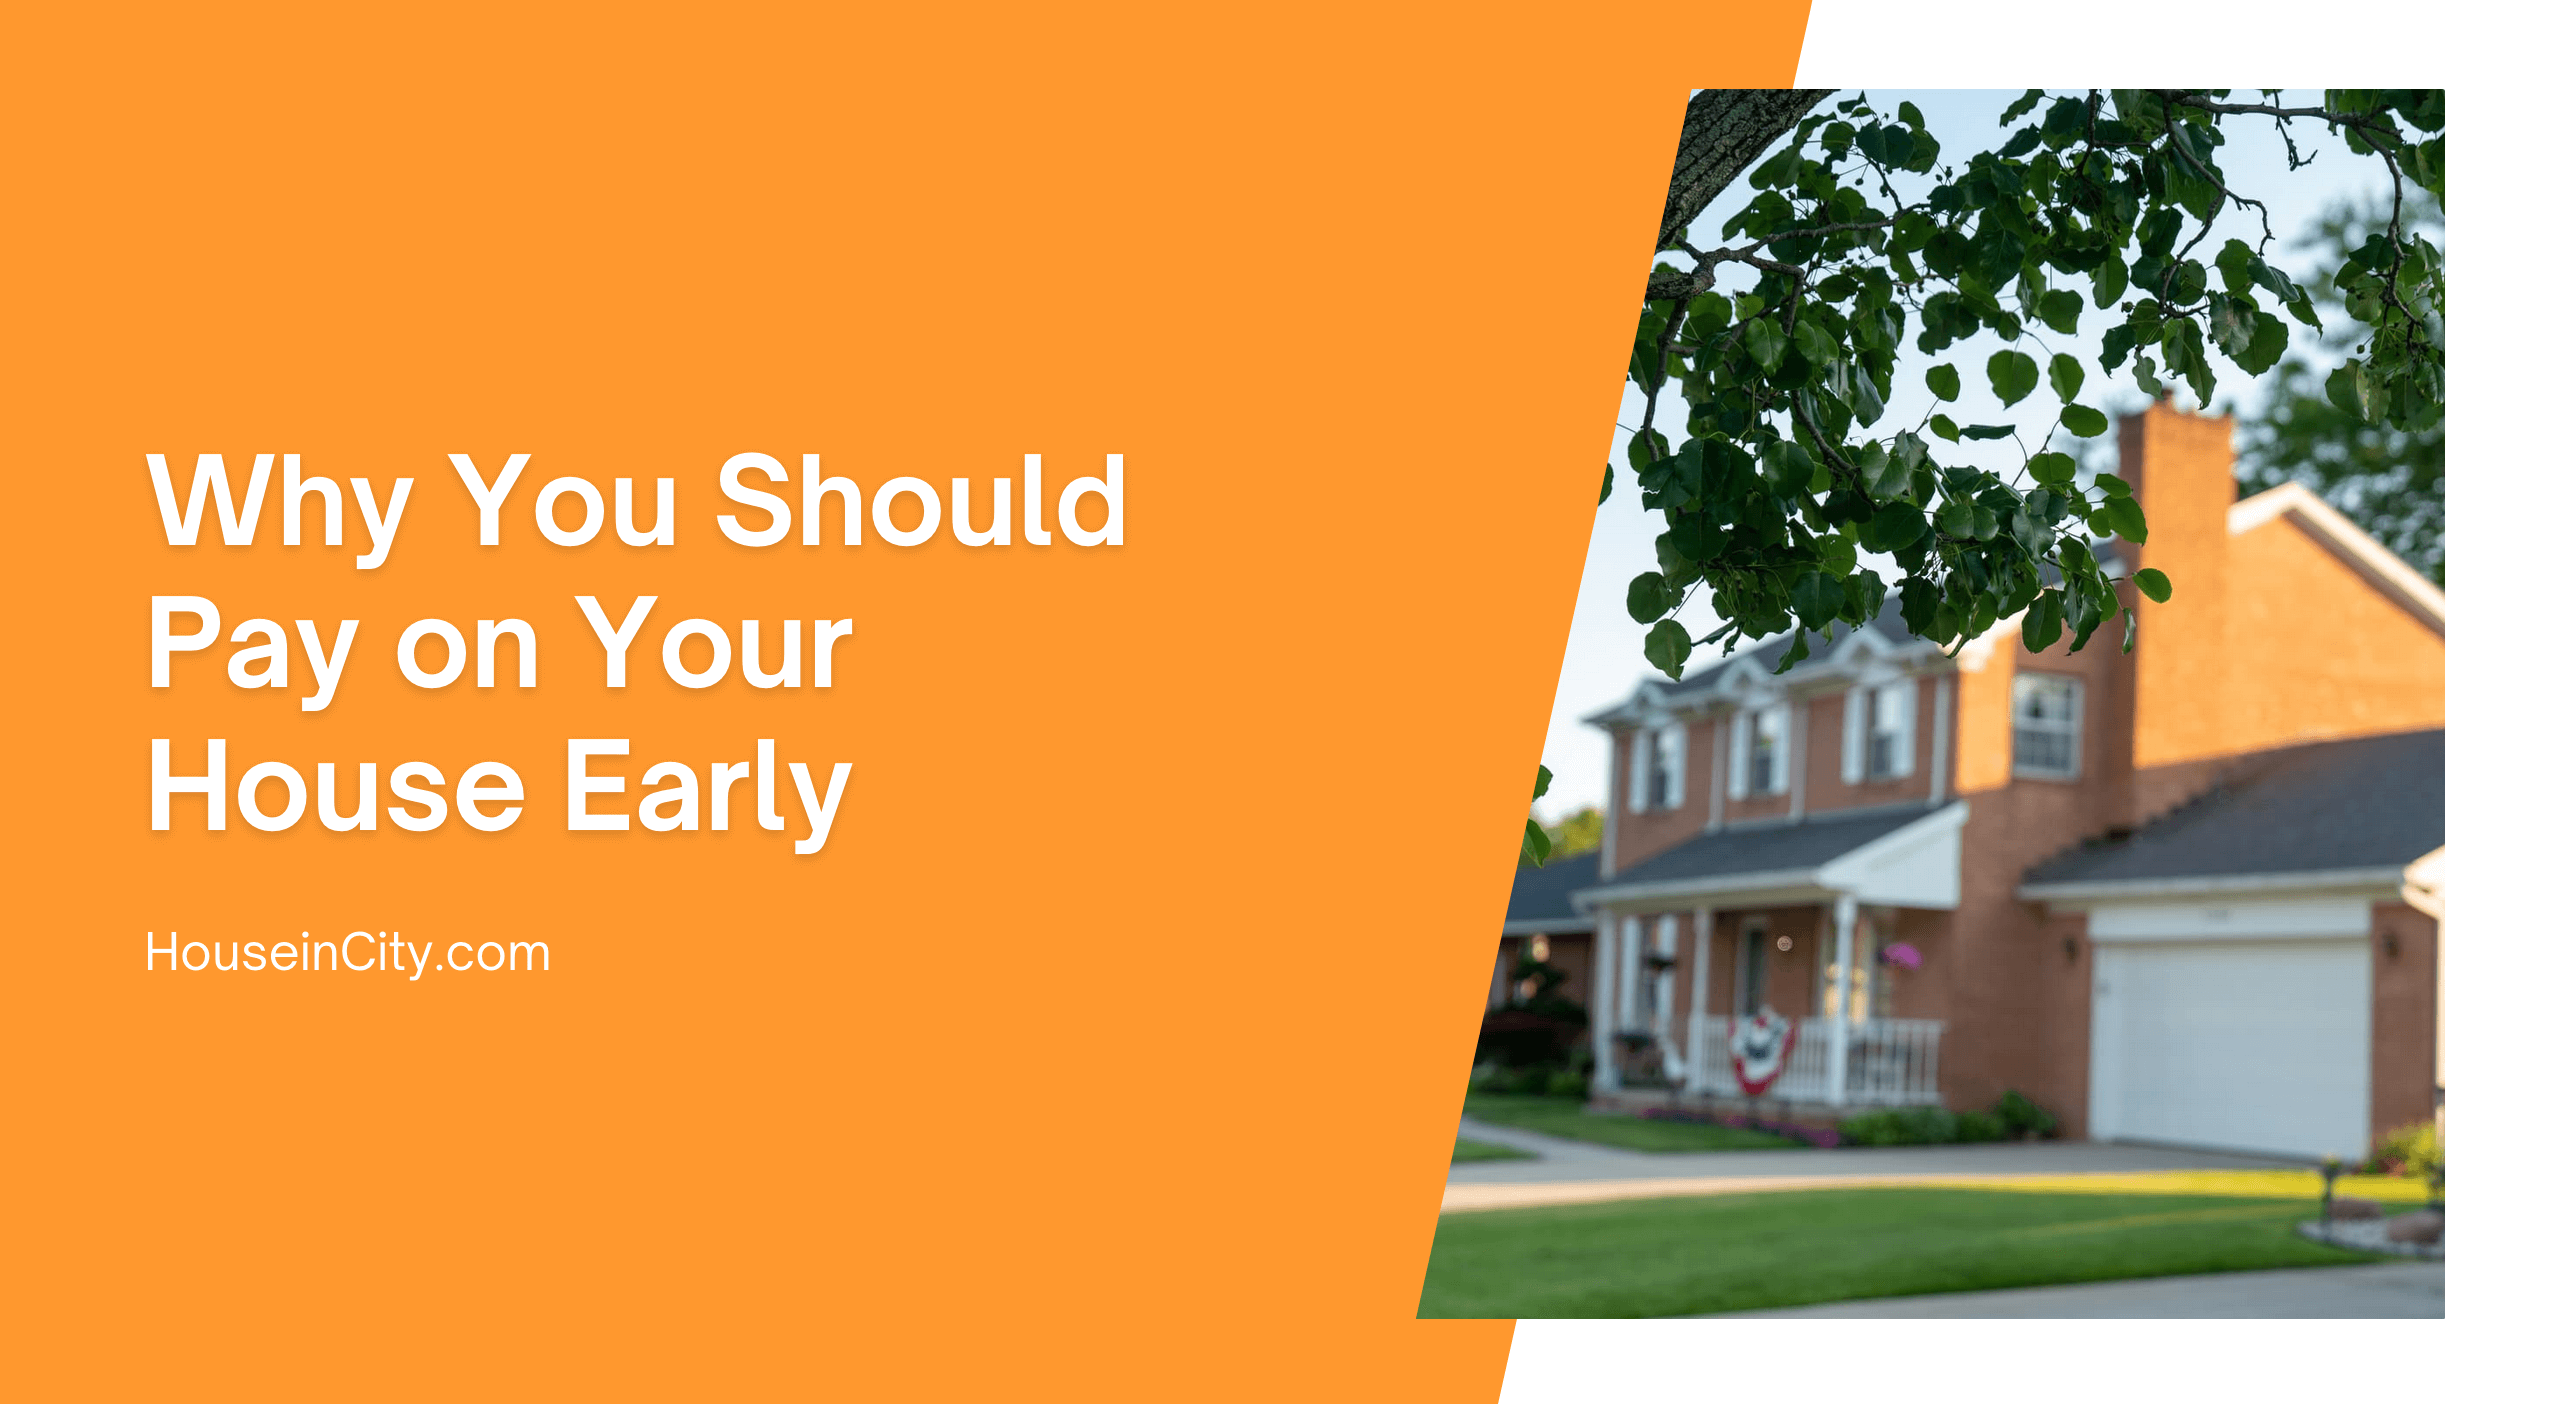 Why You Should Pay on Your House Early